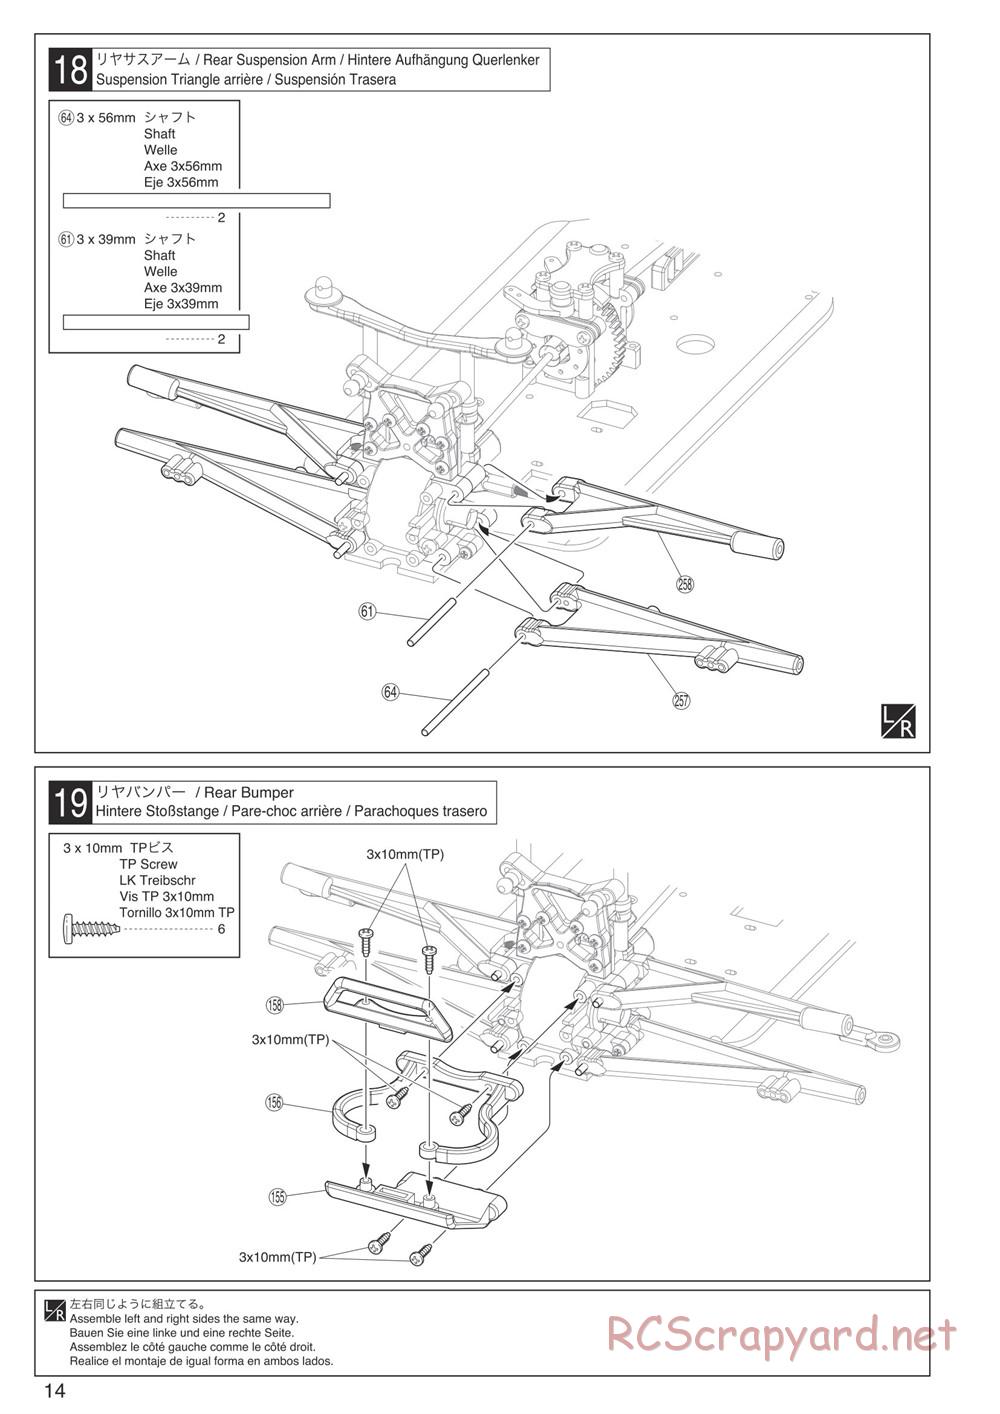 Kyosho - DMT - Manual - Page 14